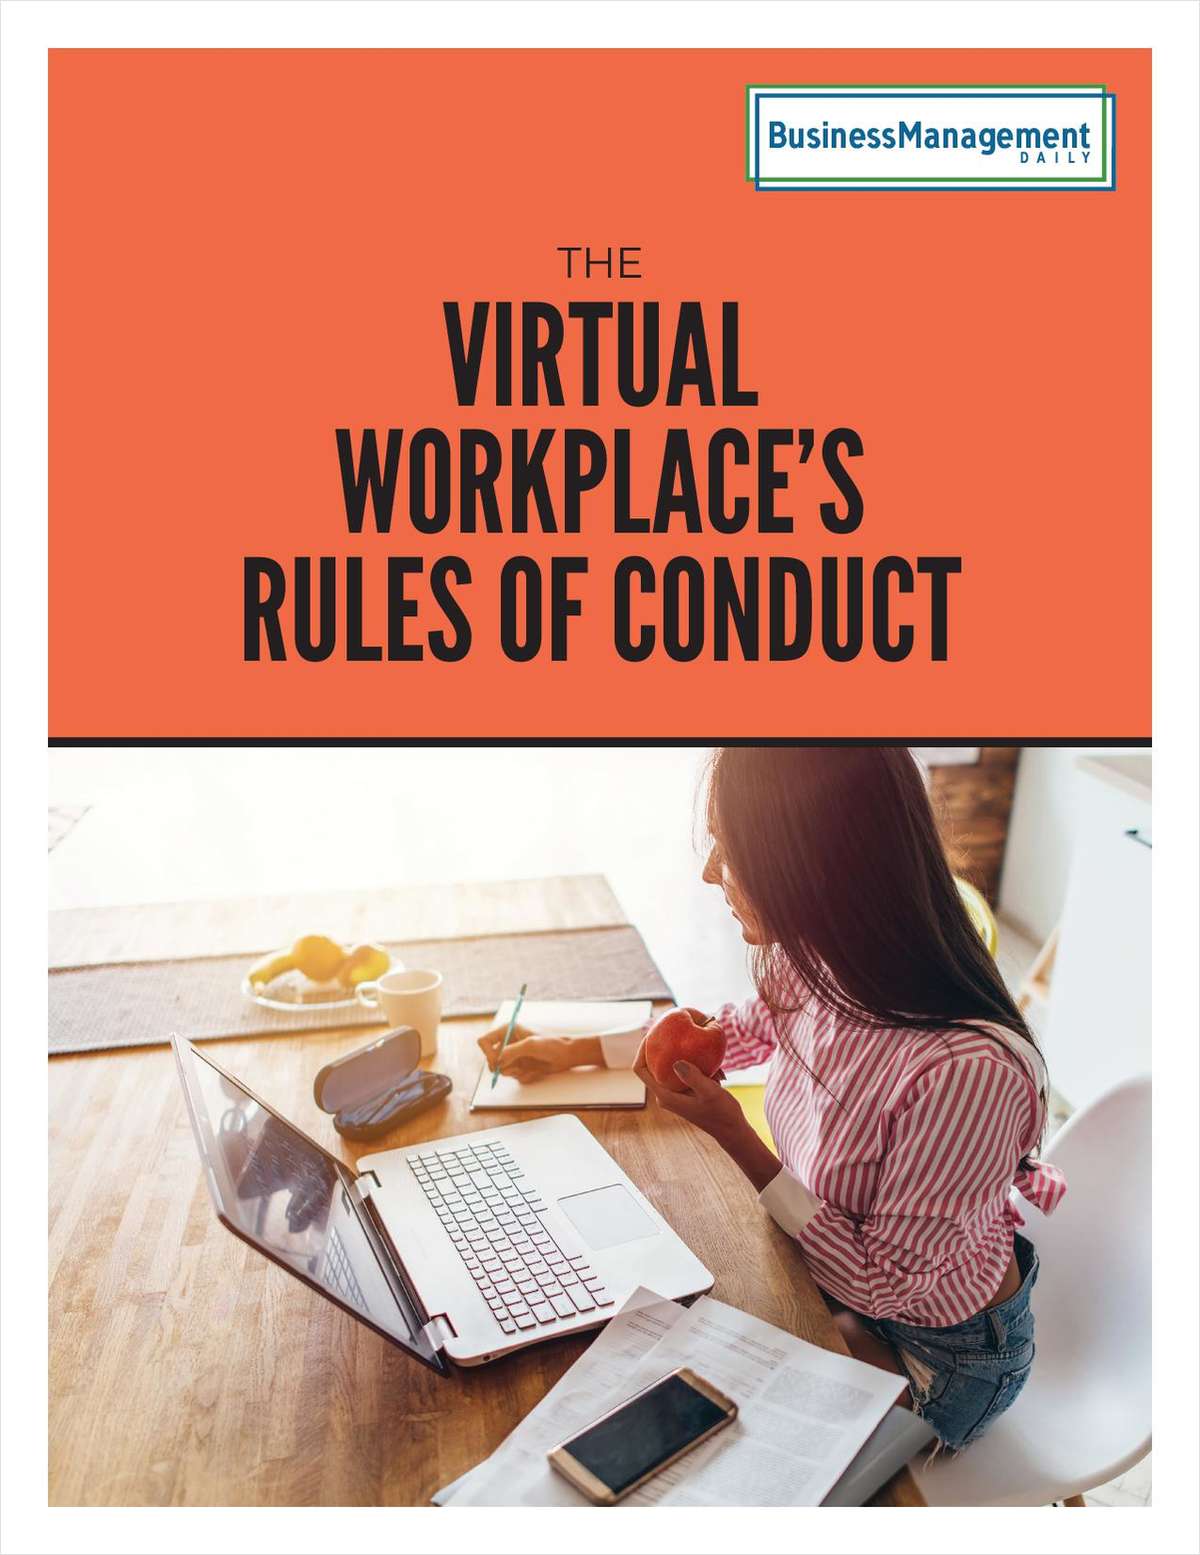 The Virtual Workplace's Rules of Conduct